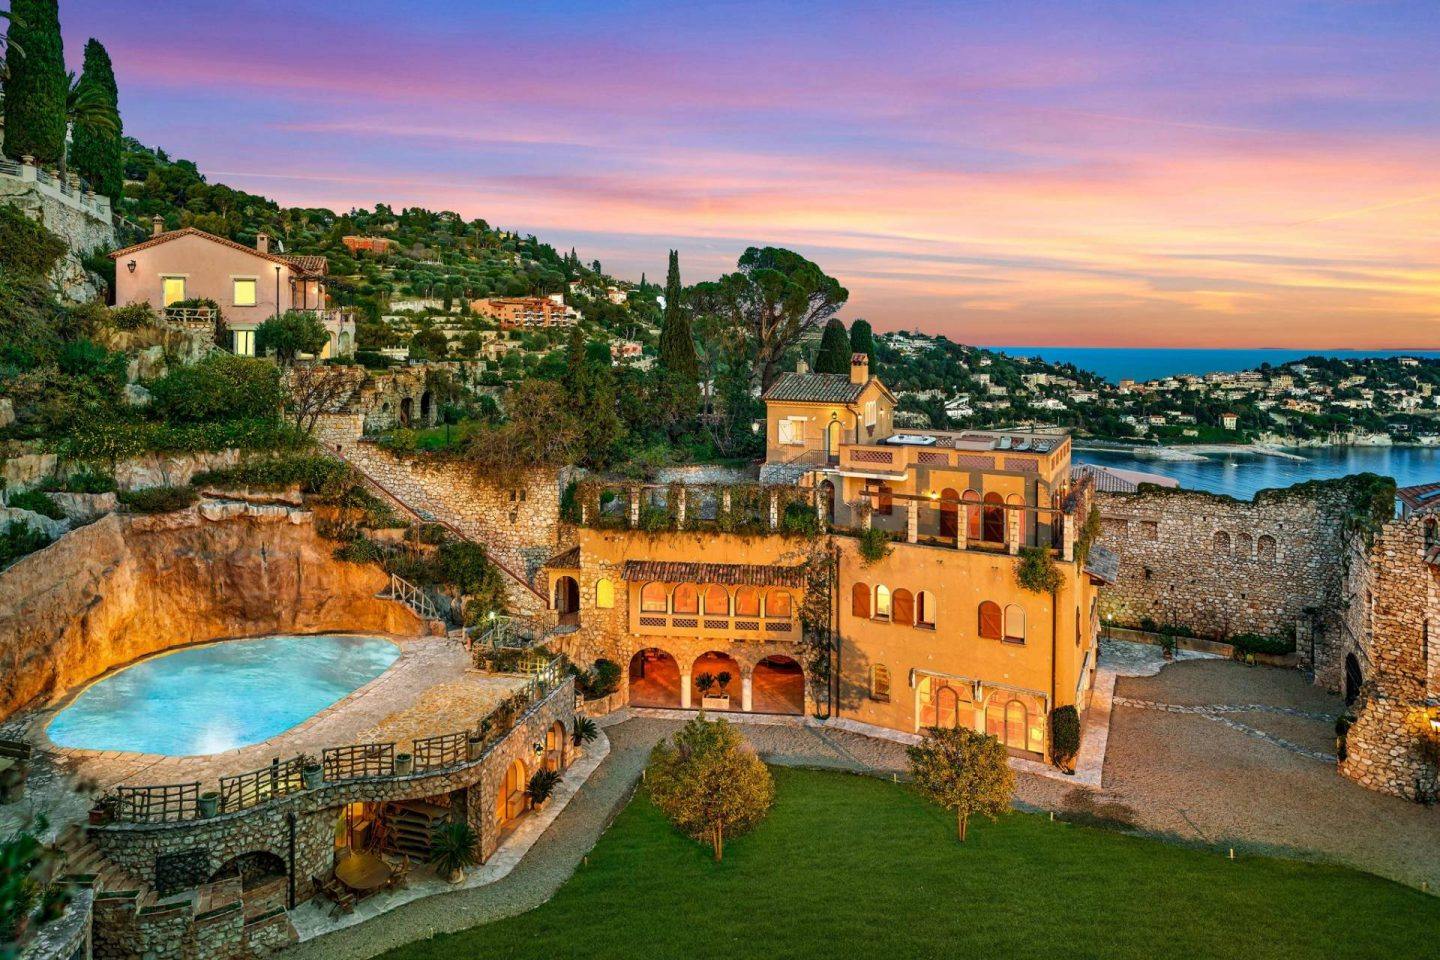 Princess Margaret’s La Carriere manor overlooking the French Riviera is being auctioned. Photo: Concierge Auctions